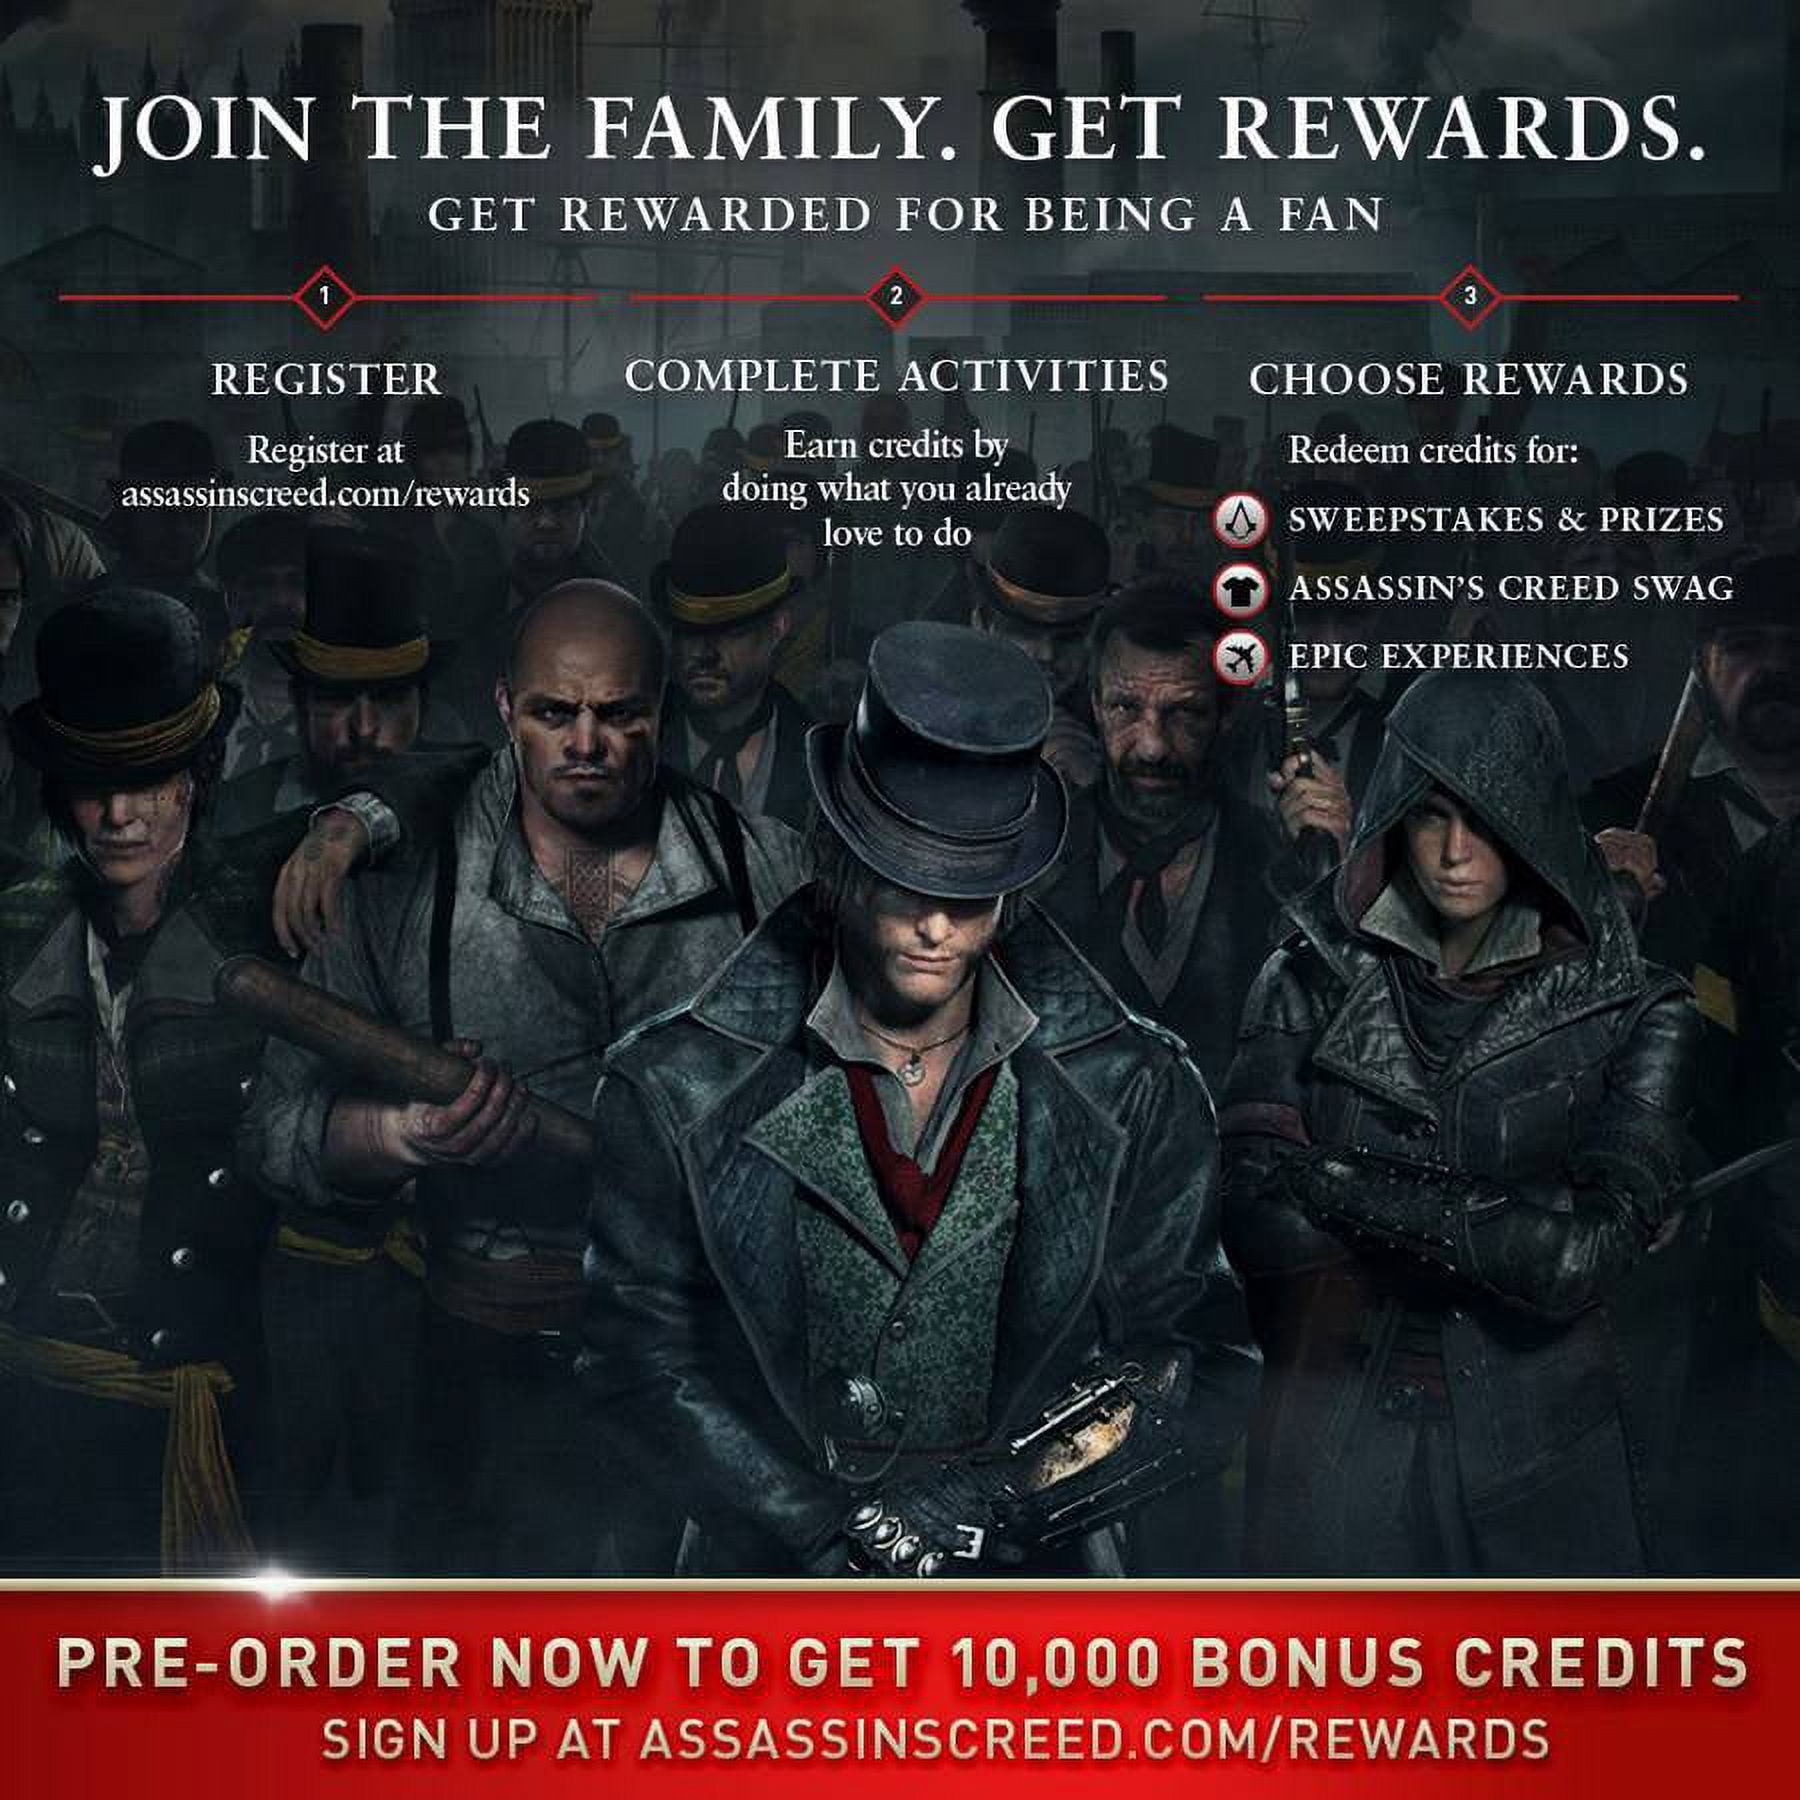 Assassin's Creed: Syndicate Day 1 Edition, Ubisoft, PC, 887256013929 